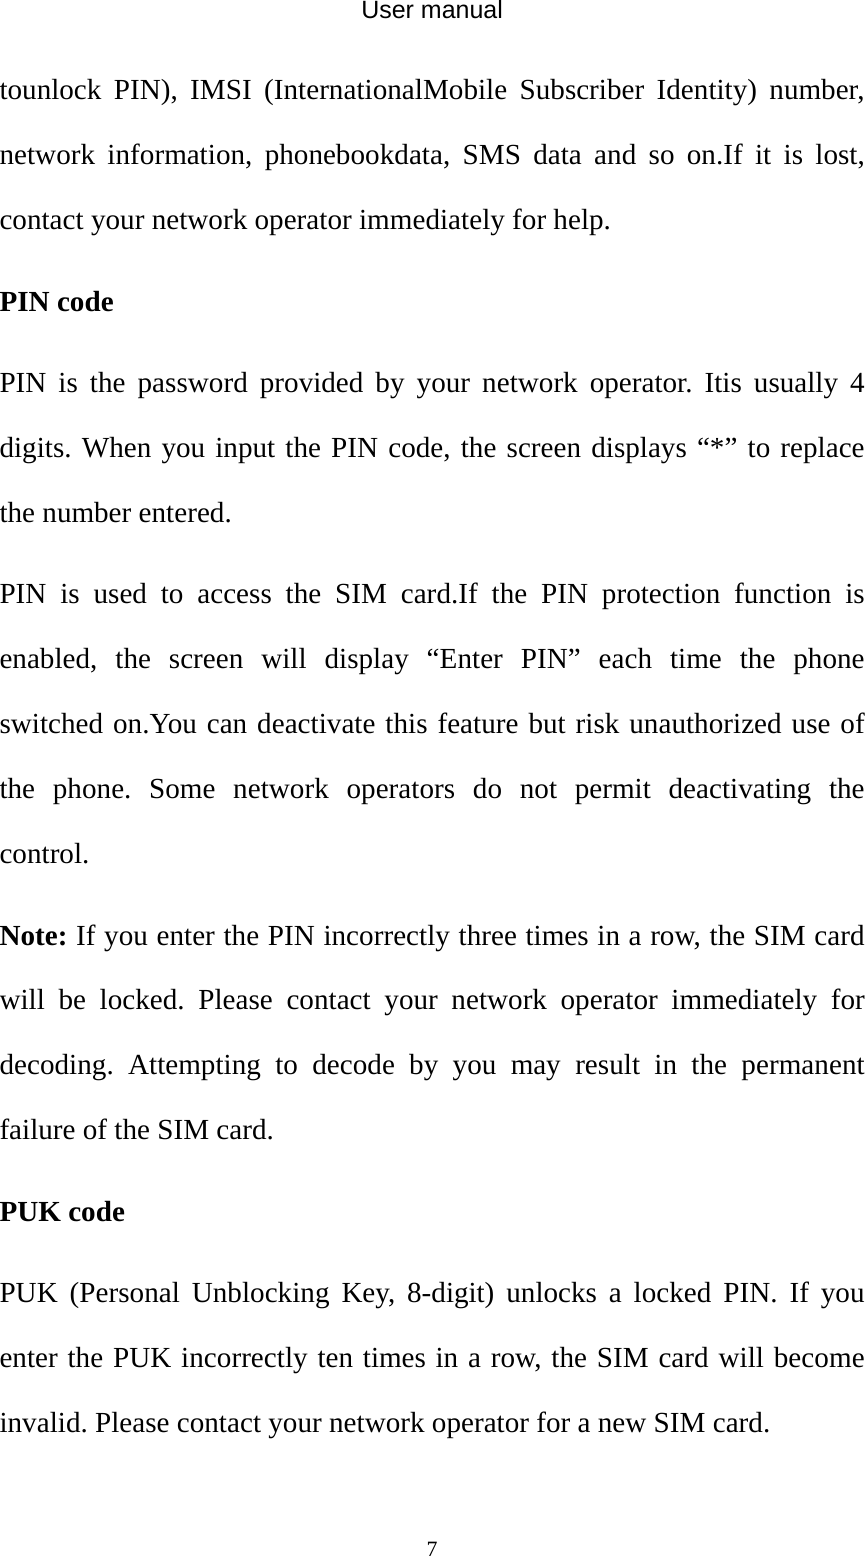 User manual  7tounlock PIN), IMSI (InternationalMobile Subscriber Identity) number, network information, phonebookdata, SMS data and so on.If it is lost, contact your network operator immediately for help. PIN code PIN is the password provided by your network operator. Itis usually 4 digits. When you input the PIN code, the screen displays “*” to replace the number entered. PIN is used to access the SIM card.If the PIN protection function is enabled, the screen will display “Enter PIN” each time the phone switched on.You can deactivate this feature but risk unauthorized use of the phone. Some network operators do not permit deactivating the control. Note: If you enter the PIN incorrectly three times in a row, the SIM card will be locked. Please contact your network operator immediately for decoding. Attempting to decode by you may result in the permanent failure of the SIM card. PUK code PUK (Personal Unblocking Key, 8-digit) unlocks a locked PIN. If you enter the PUK incorrectly ten times in a row, the SIM card will become invalid. Please contact your network operator for a new SIM card.  